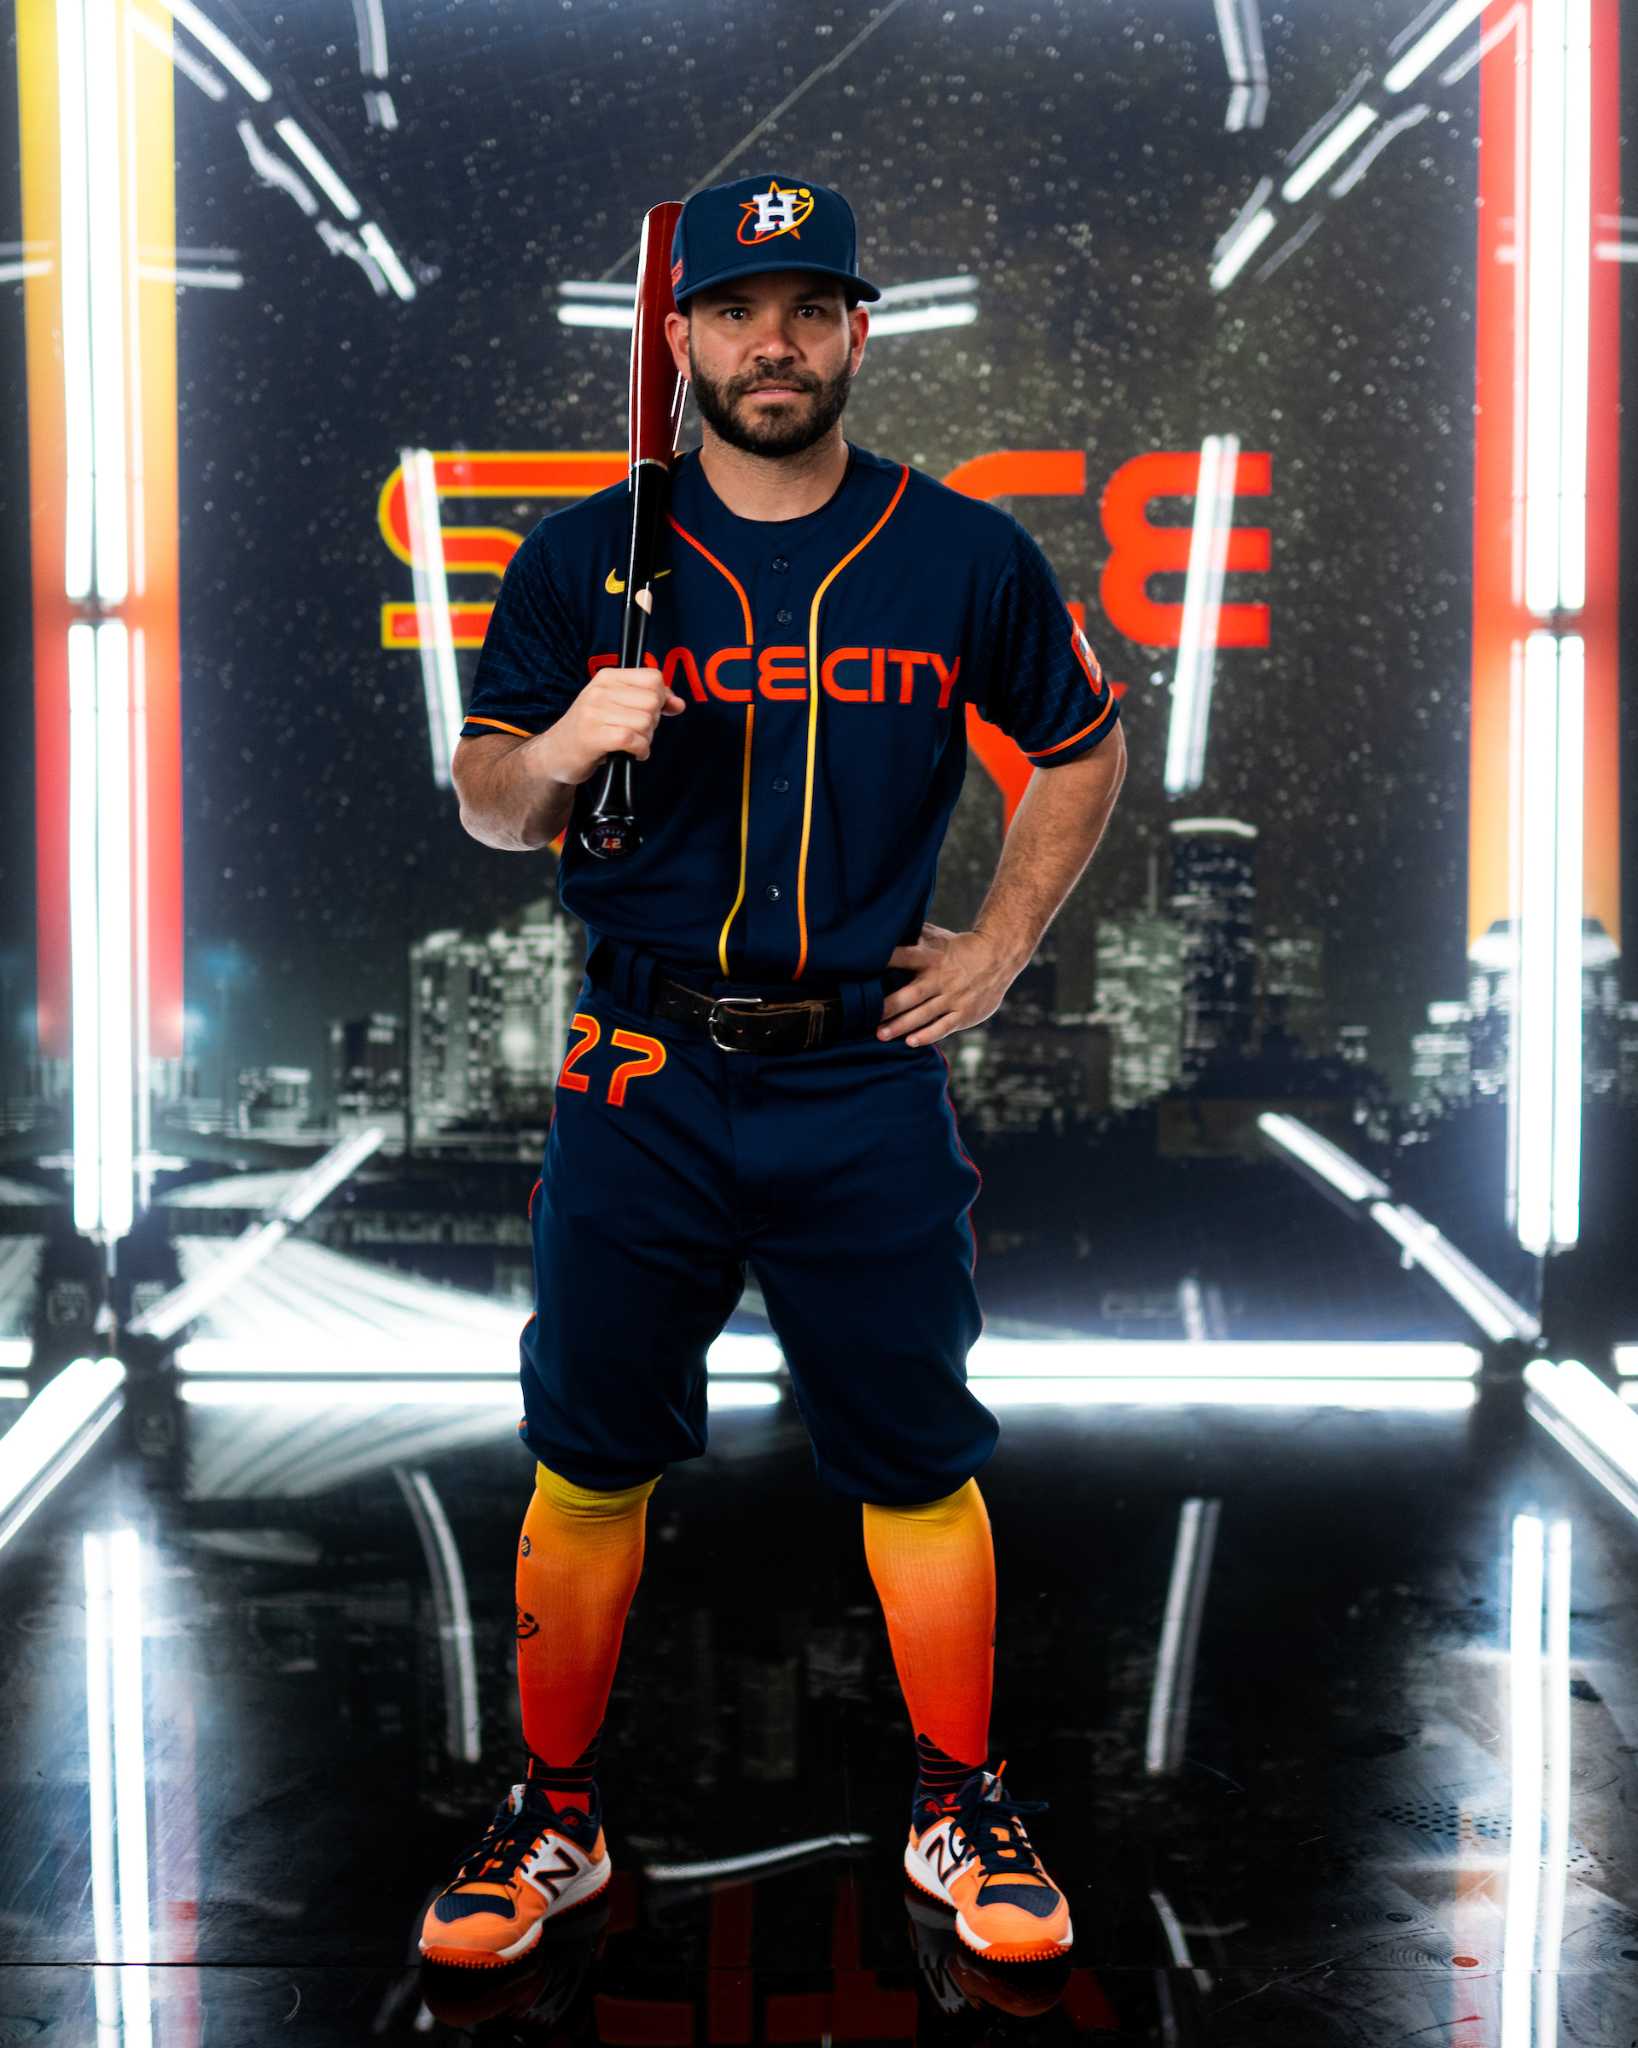 The details behind Astros' City Connect uniforms that salute Space